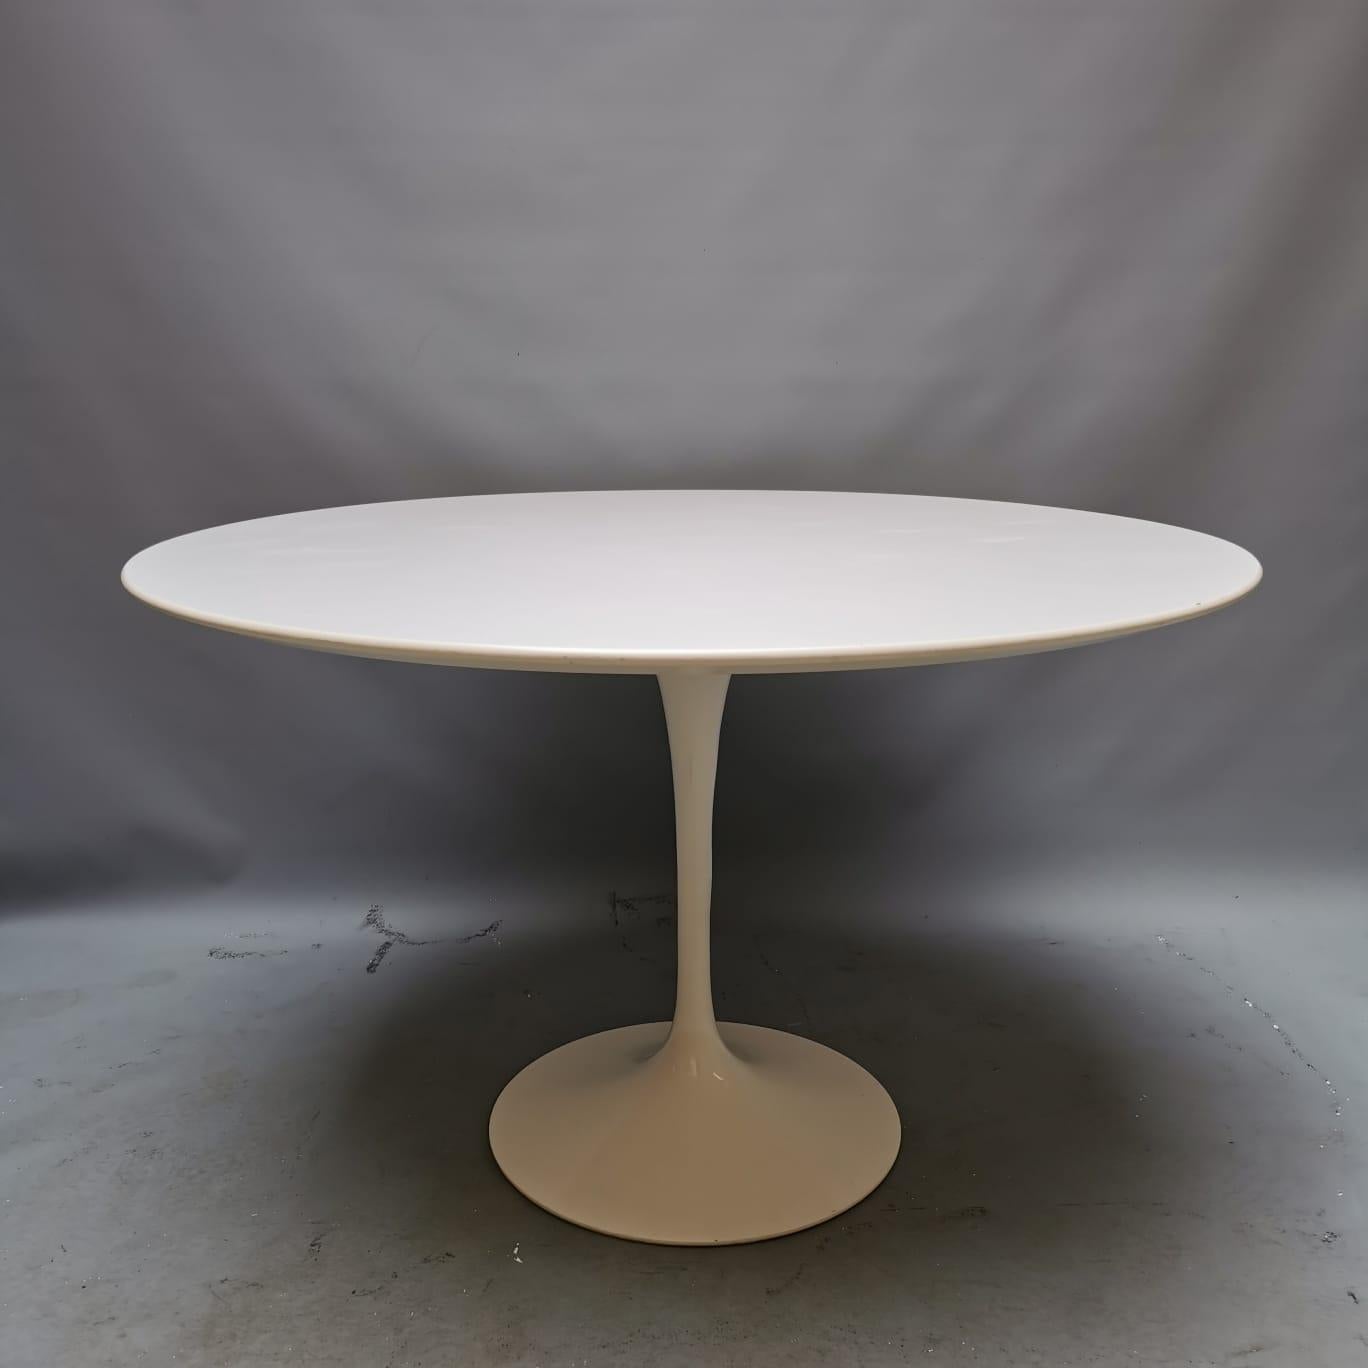 This is perhaps one of the best-known tables in the history of design, innovative project by Eero Saarinen from the 1950s. Wherever you go to put this table it will be able to create a unique and elegant environment. The object being produced in the